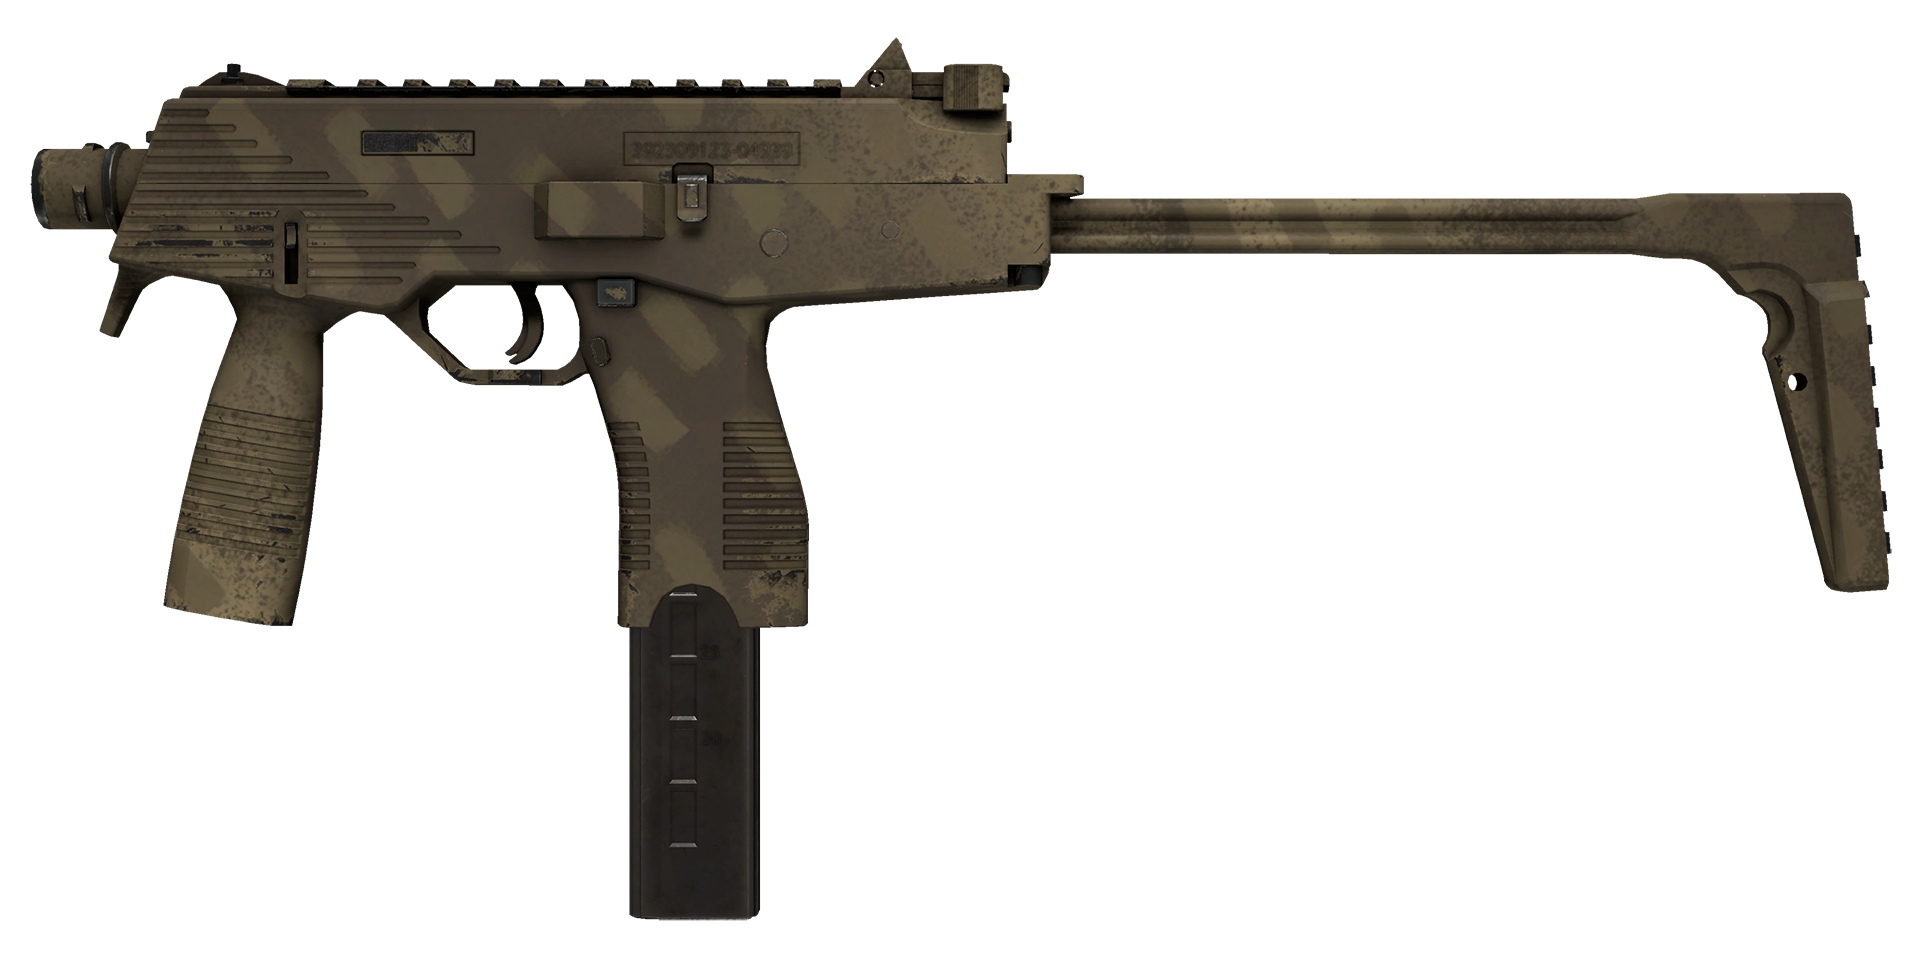 instal the new version for android PP-Bizon Sand Dashed cs go skin